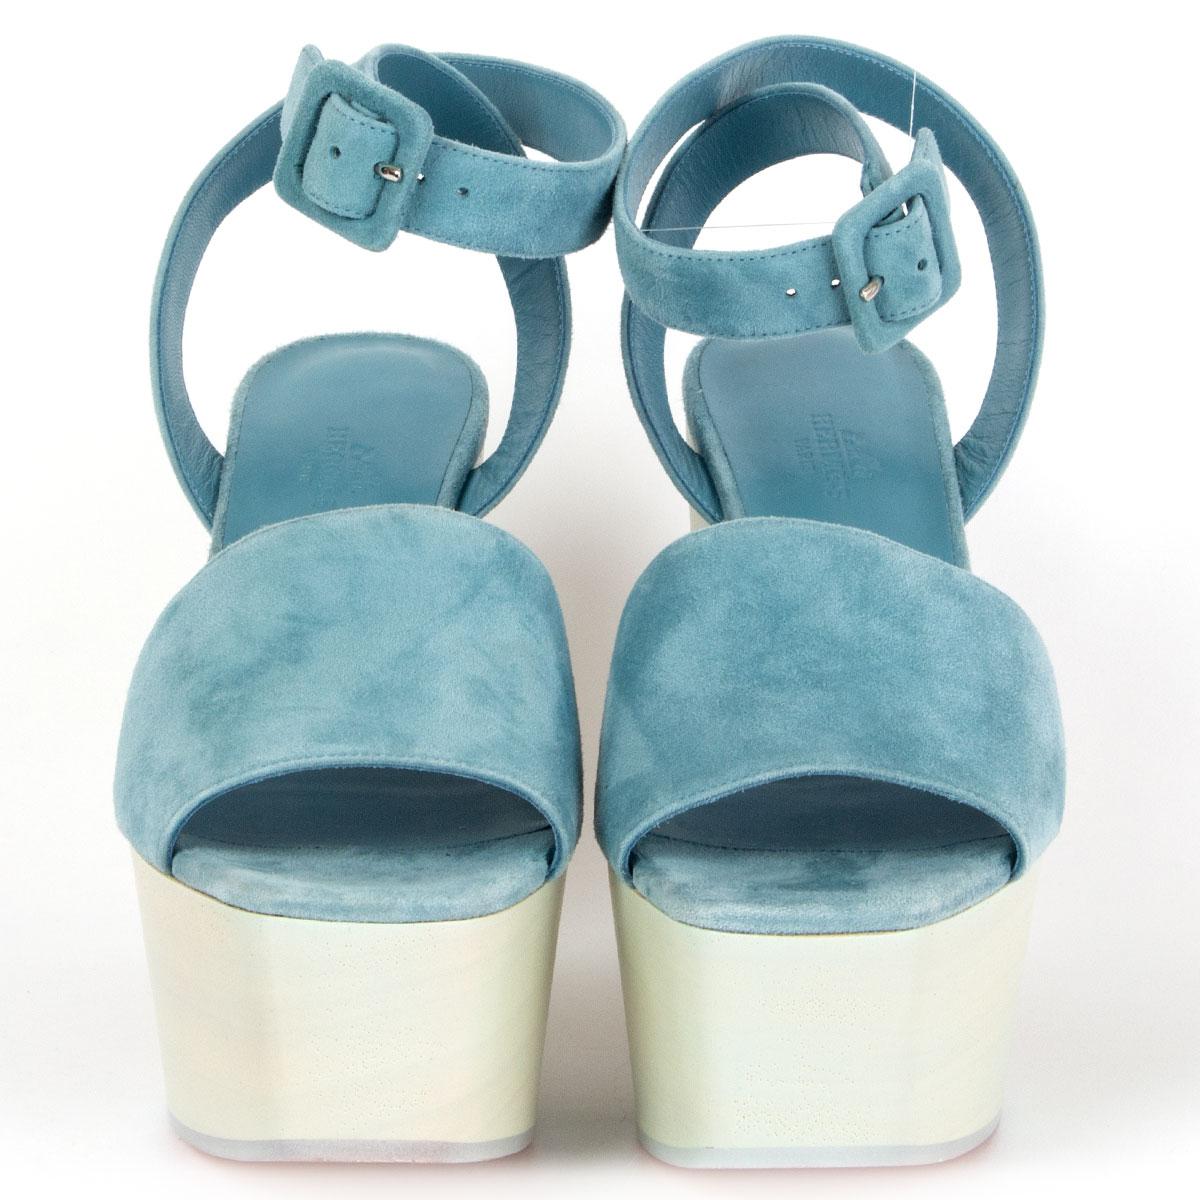 100% authentic Hermès Tendress ankle-strap wedge platform sandals in sky blue suede goatskin with hollow wooden wedge heel with cut-out cloud motif. Close with a suede goatskin buckle on the side. Brand new. Come with dust bag. 

Imprinted